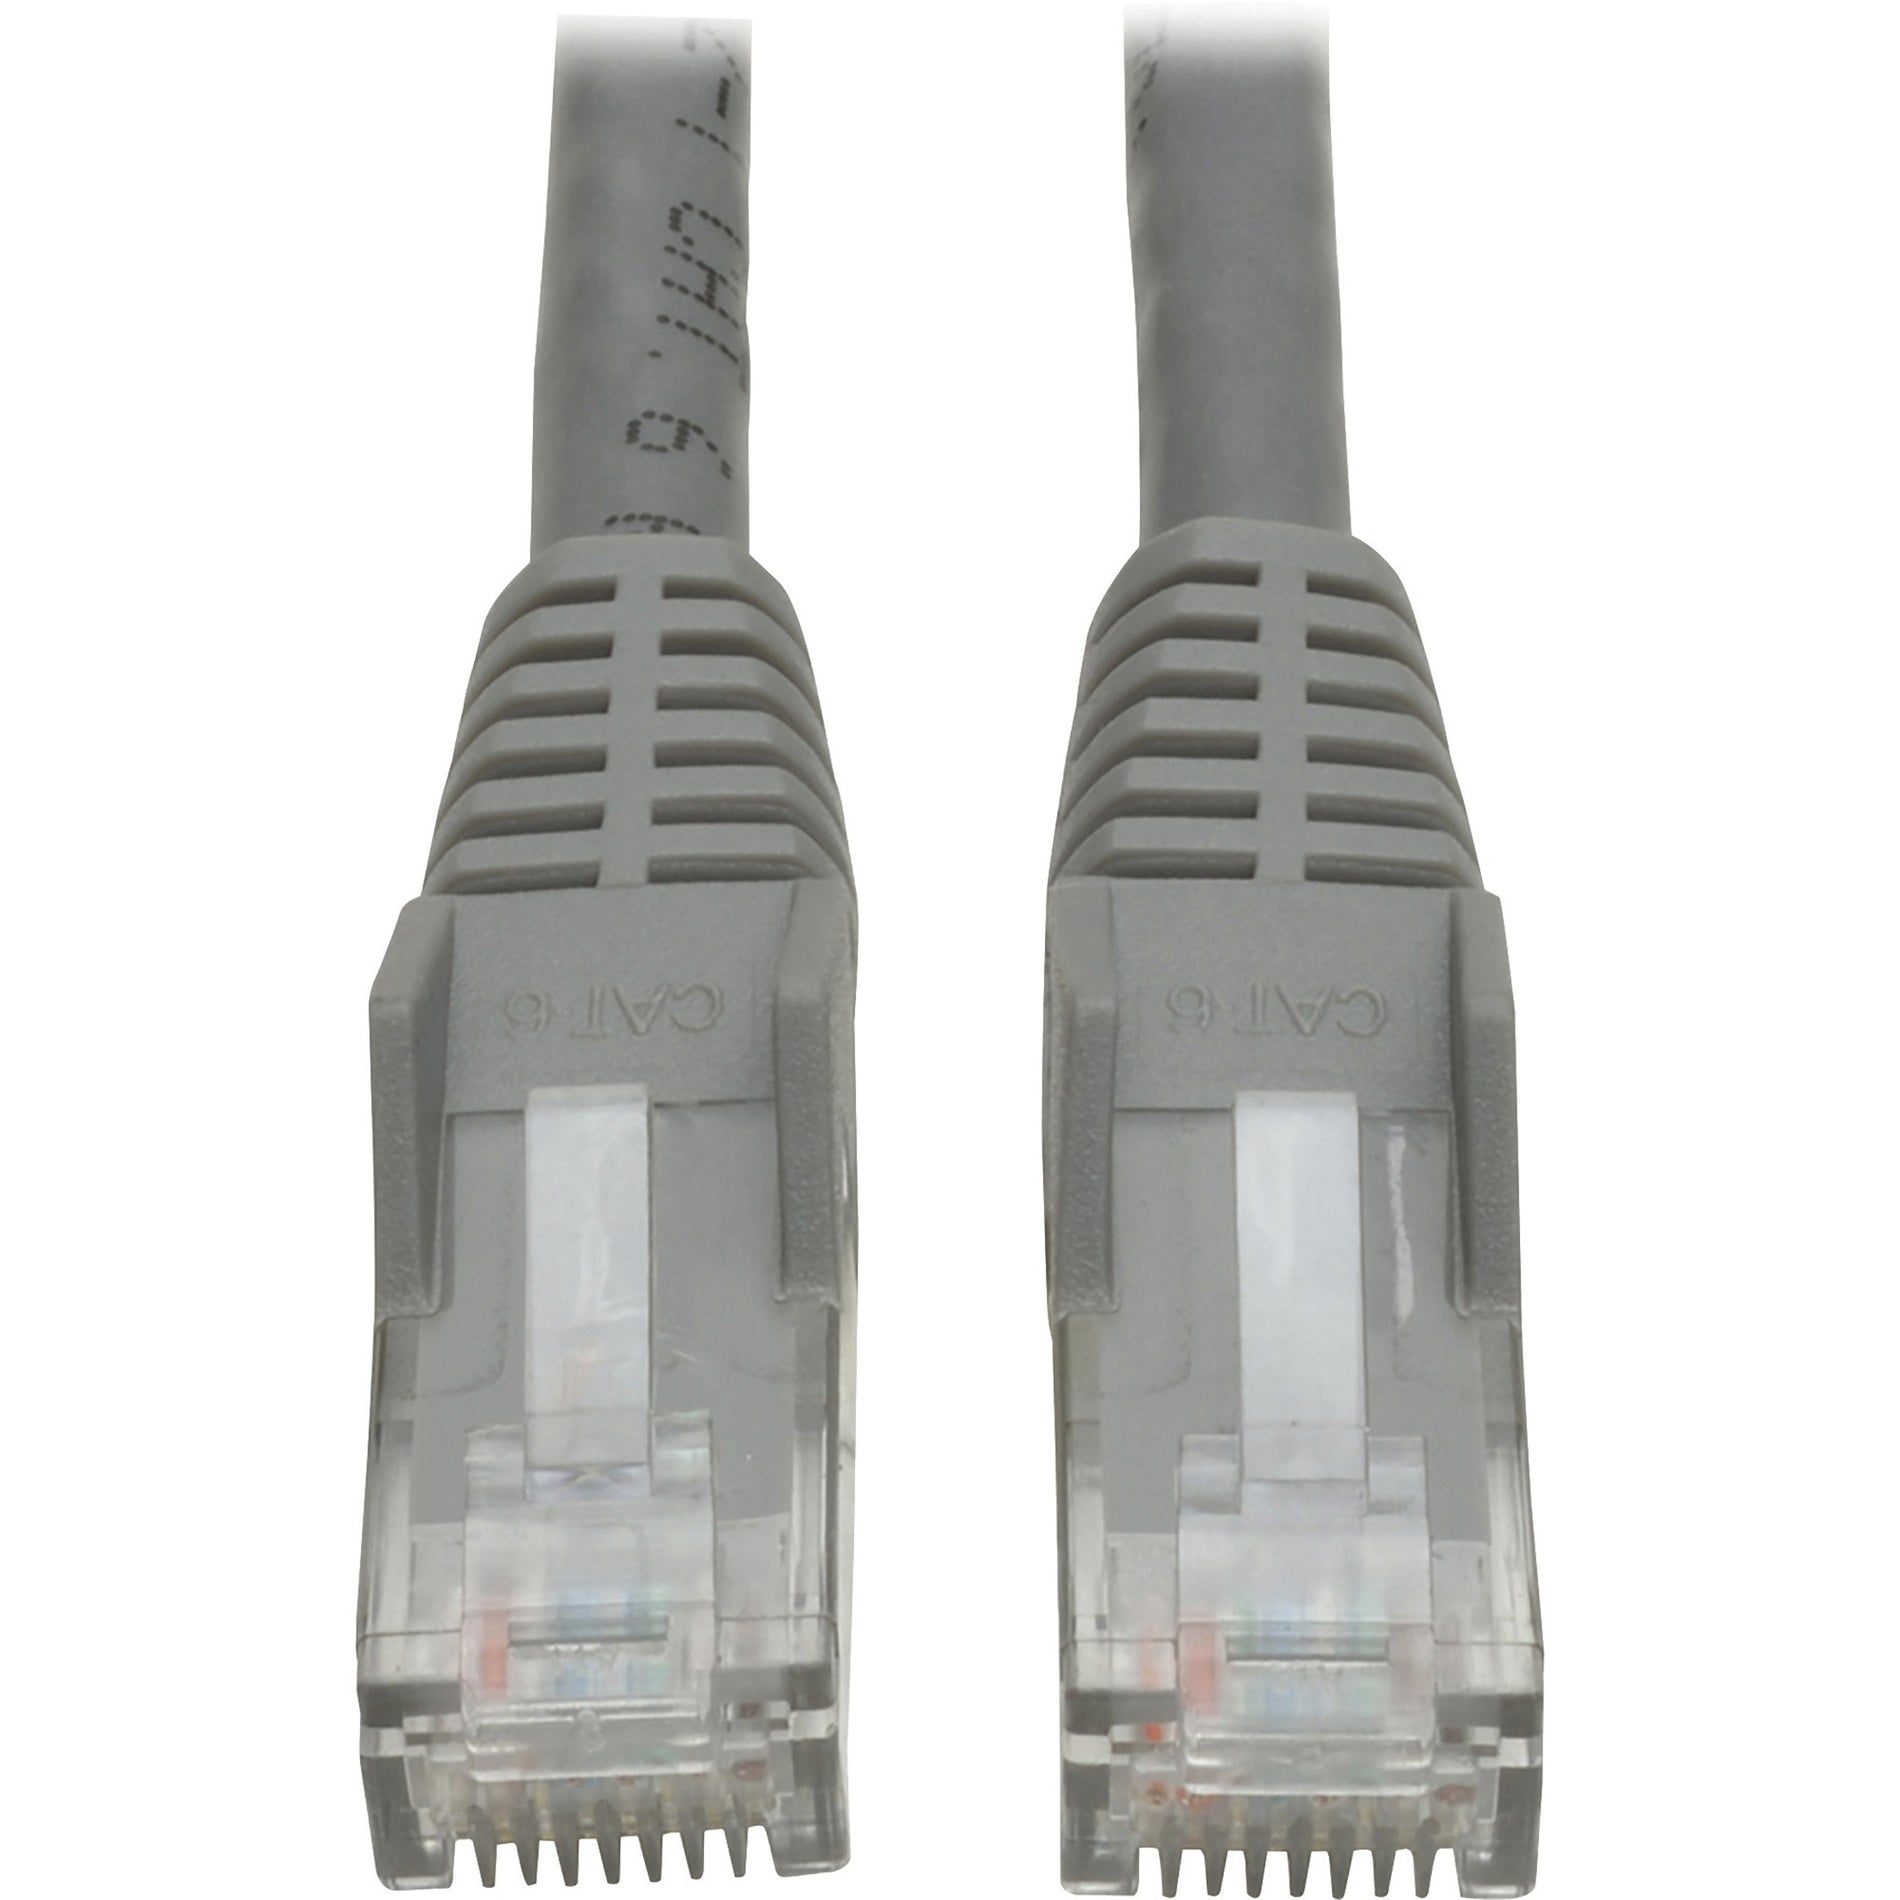 Tripp Lite N201-001-GY Cat6 UTP Patch Cable, 1ft Gray Gigabit Snagless RJ45 Patch Cable